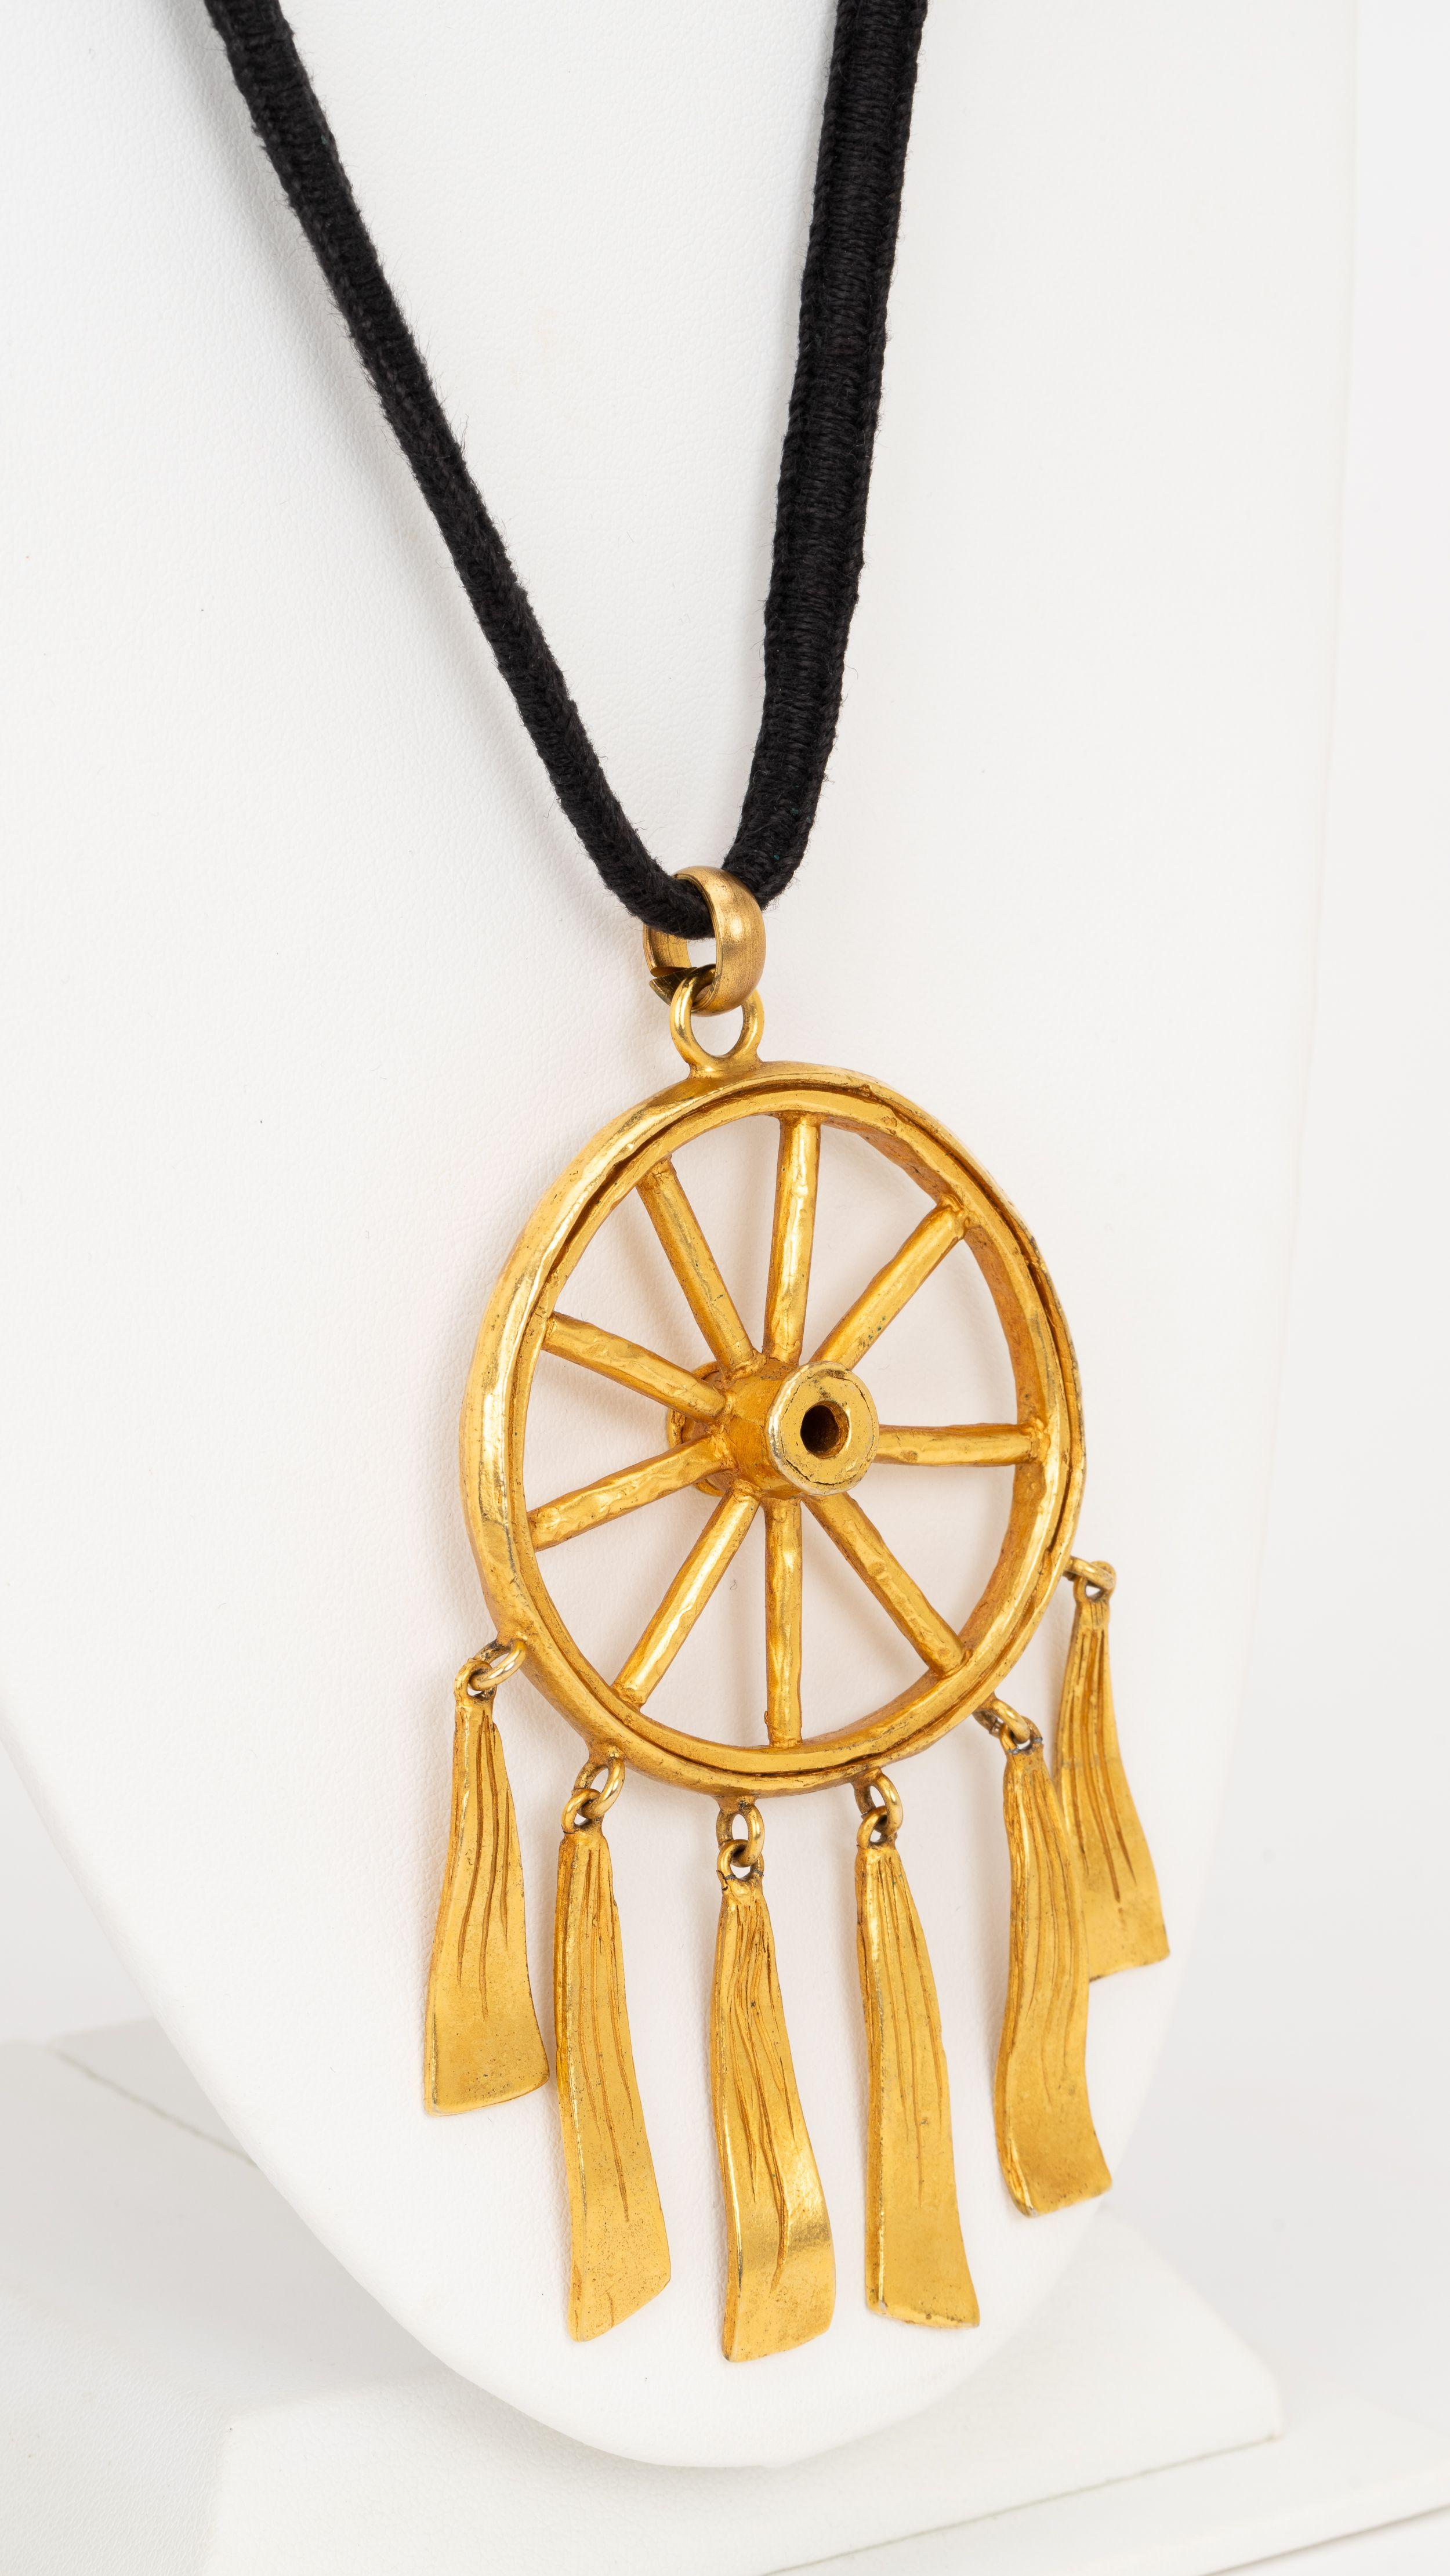 Highly collectible Hermès 80s vintage pendant necklace. Gold plated dream catcher pendant and thick black cord necklace. Pendant D 2.25”. Comes with original box.